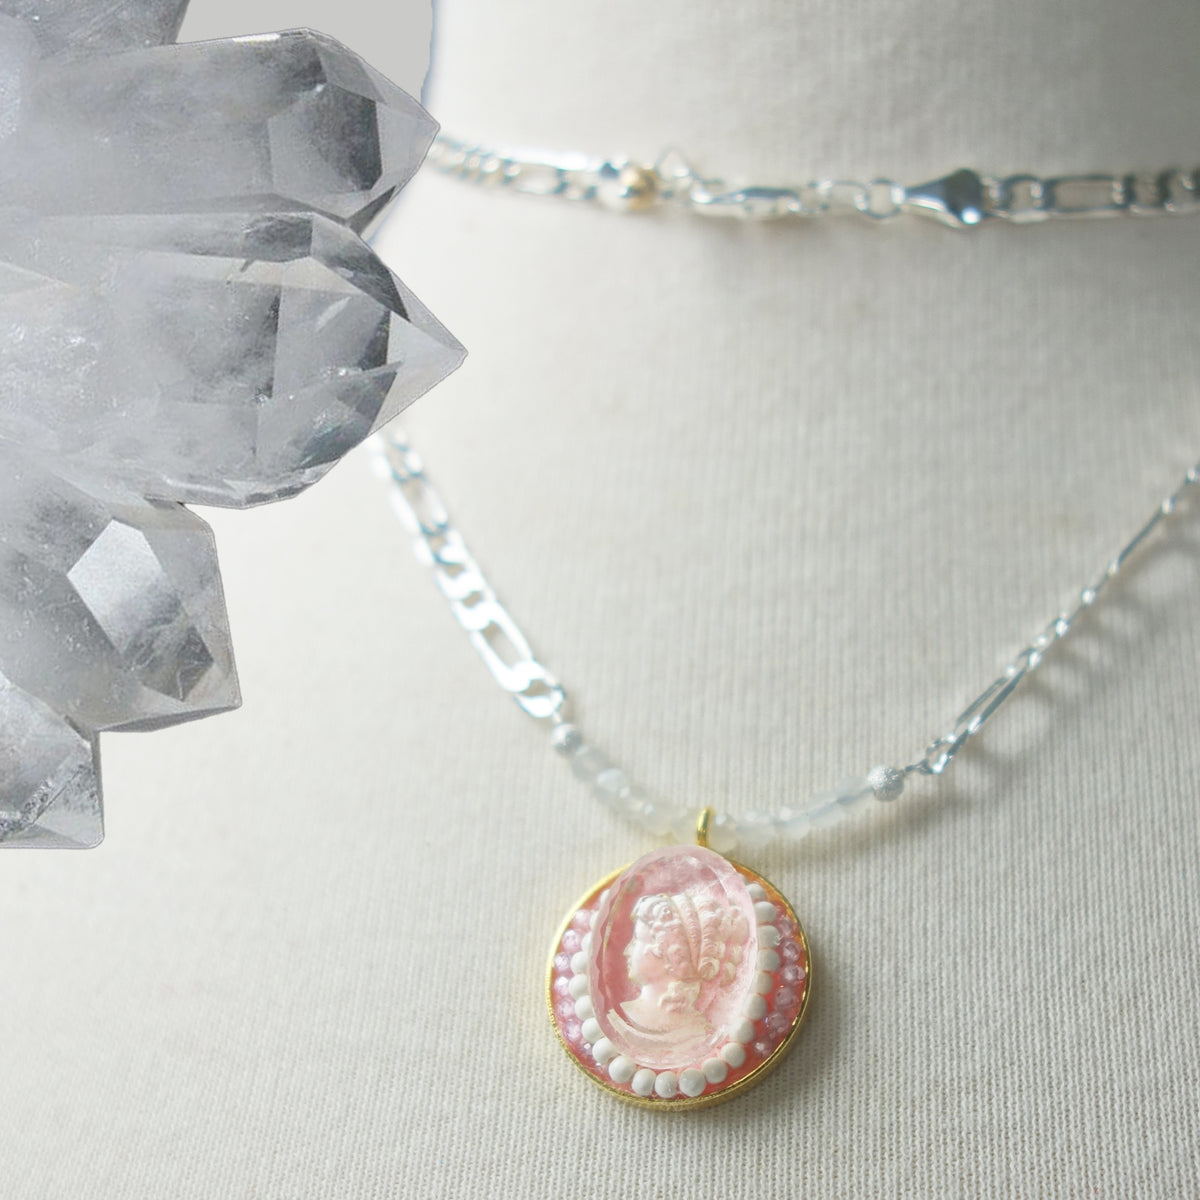 Rare Clear Quartz cameo and White Turquoise mosaic necklace